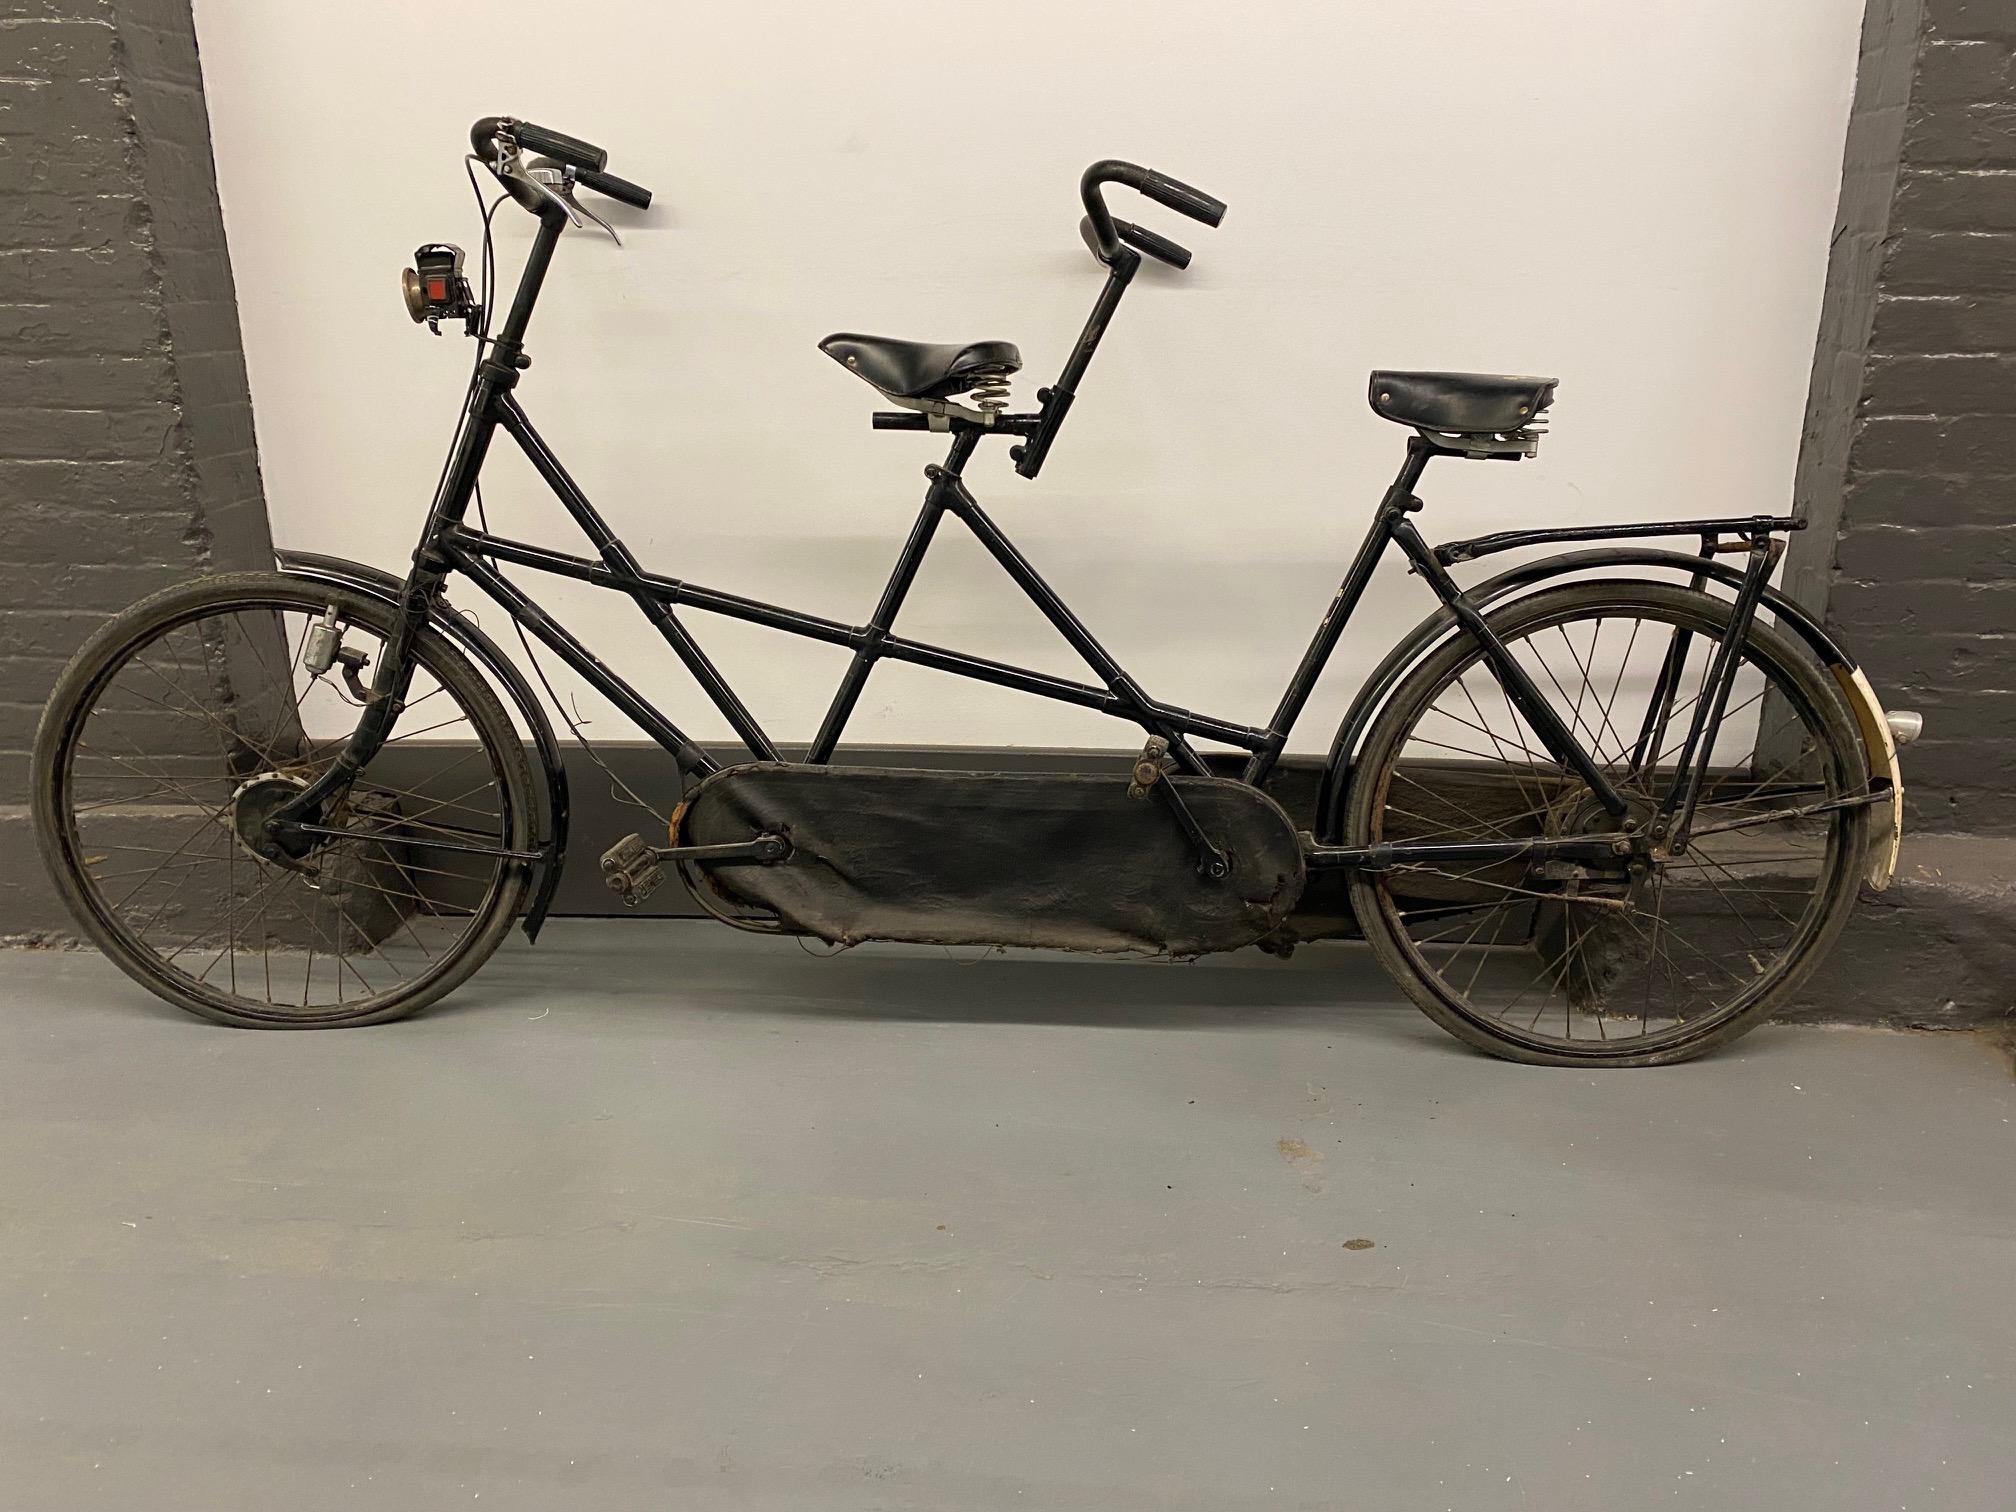 Rare Vintage Dutch Tandem Bicycle by Burgers including a Tajindia Rolex oil bicycle lamp.
Measures: Seat height in front 36 in. seat height in the back 35 in.

The history of Burgers goes back almost 150 years. In 1869, the blacksmith Henricus